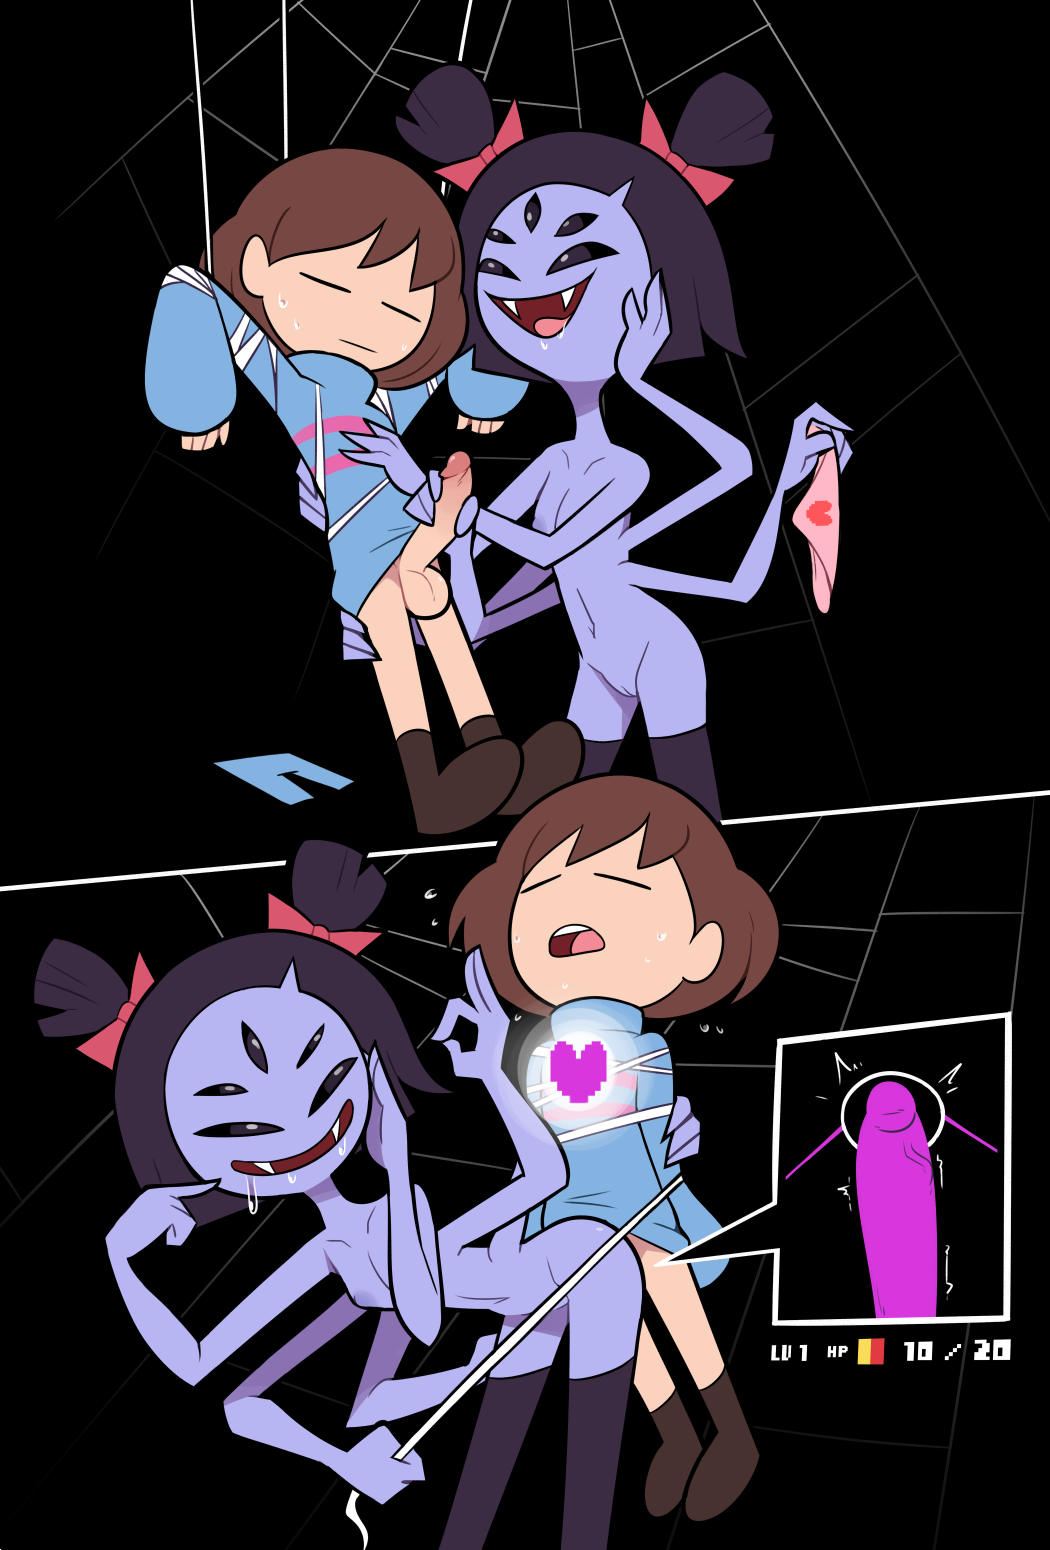 anthro bondage bottomless_male frisk frisk_(undertale) gameplay_mechanics grabbing_penis handjob health_bar heart holding_underwear hp_bar human interspecies loli male/female male_frisk miscon muffet multiple_arms multiple_eyes nude_female panties penetration penis penis_grab purple_skin pussy pussy_juice sex shota spider straight testicle tied_up trapped undertale undertale_(series) undressing vaginal vaginal_insertion vaginal_penetration vaginal_sex web x-ray